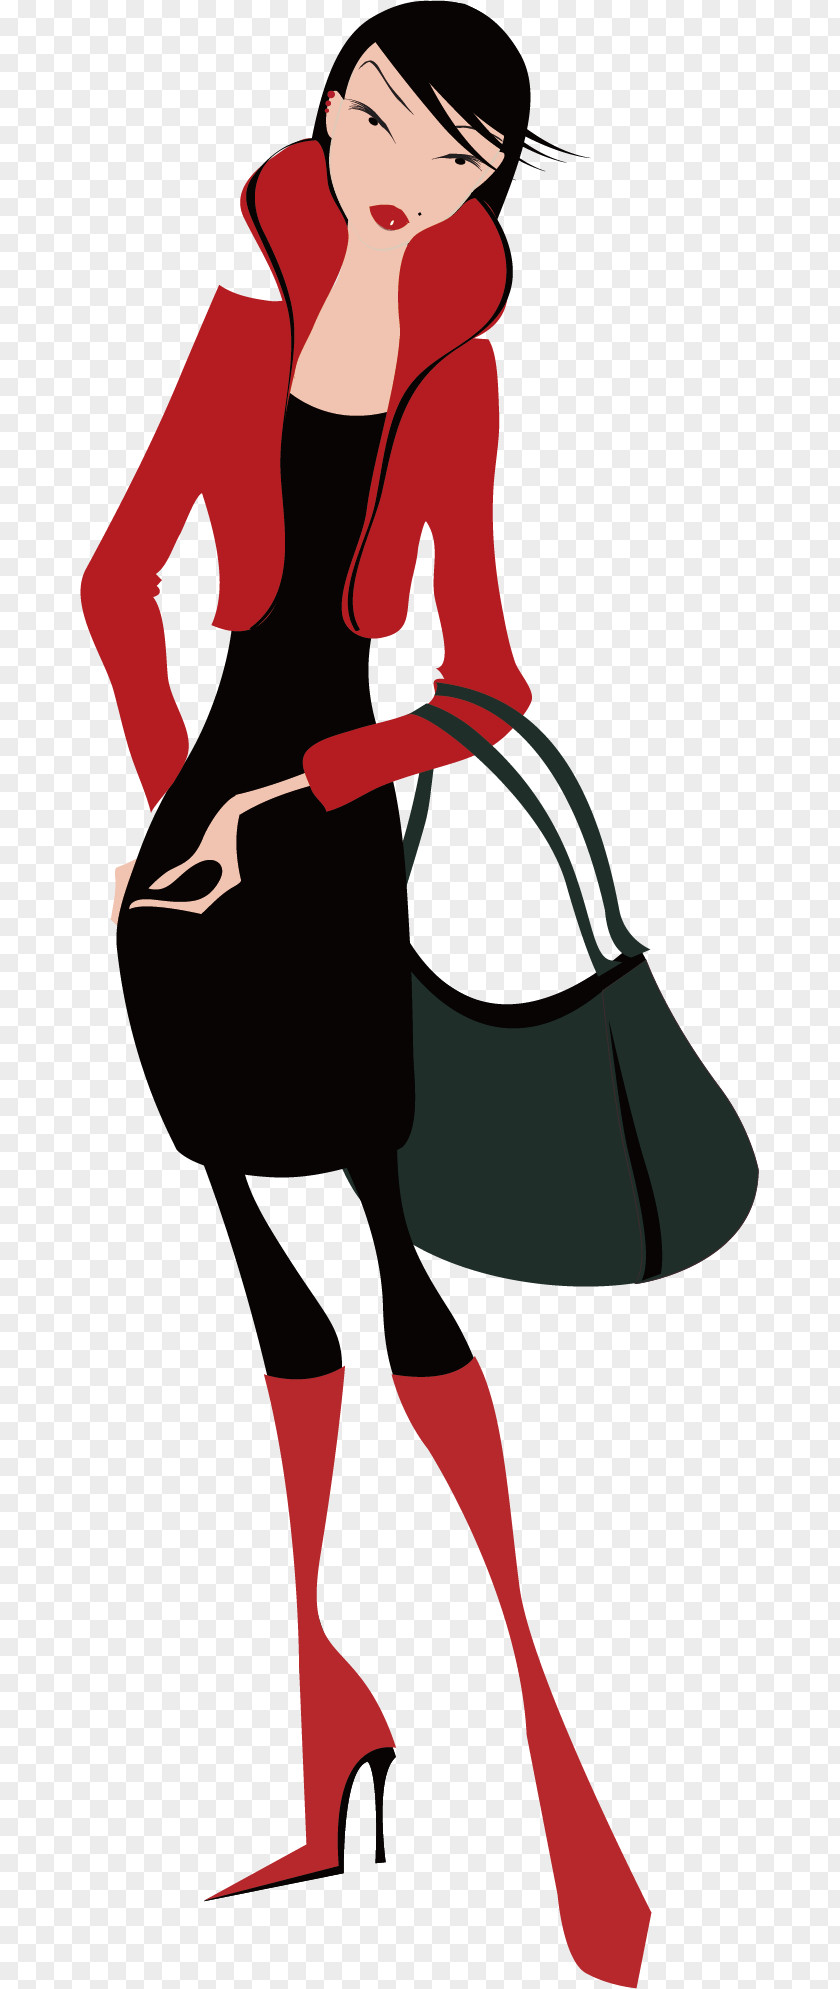 Take Pictures Of The Model Fashion Cartoon Illustration PNG